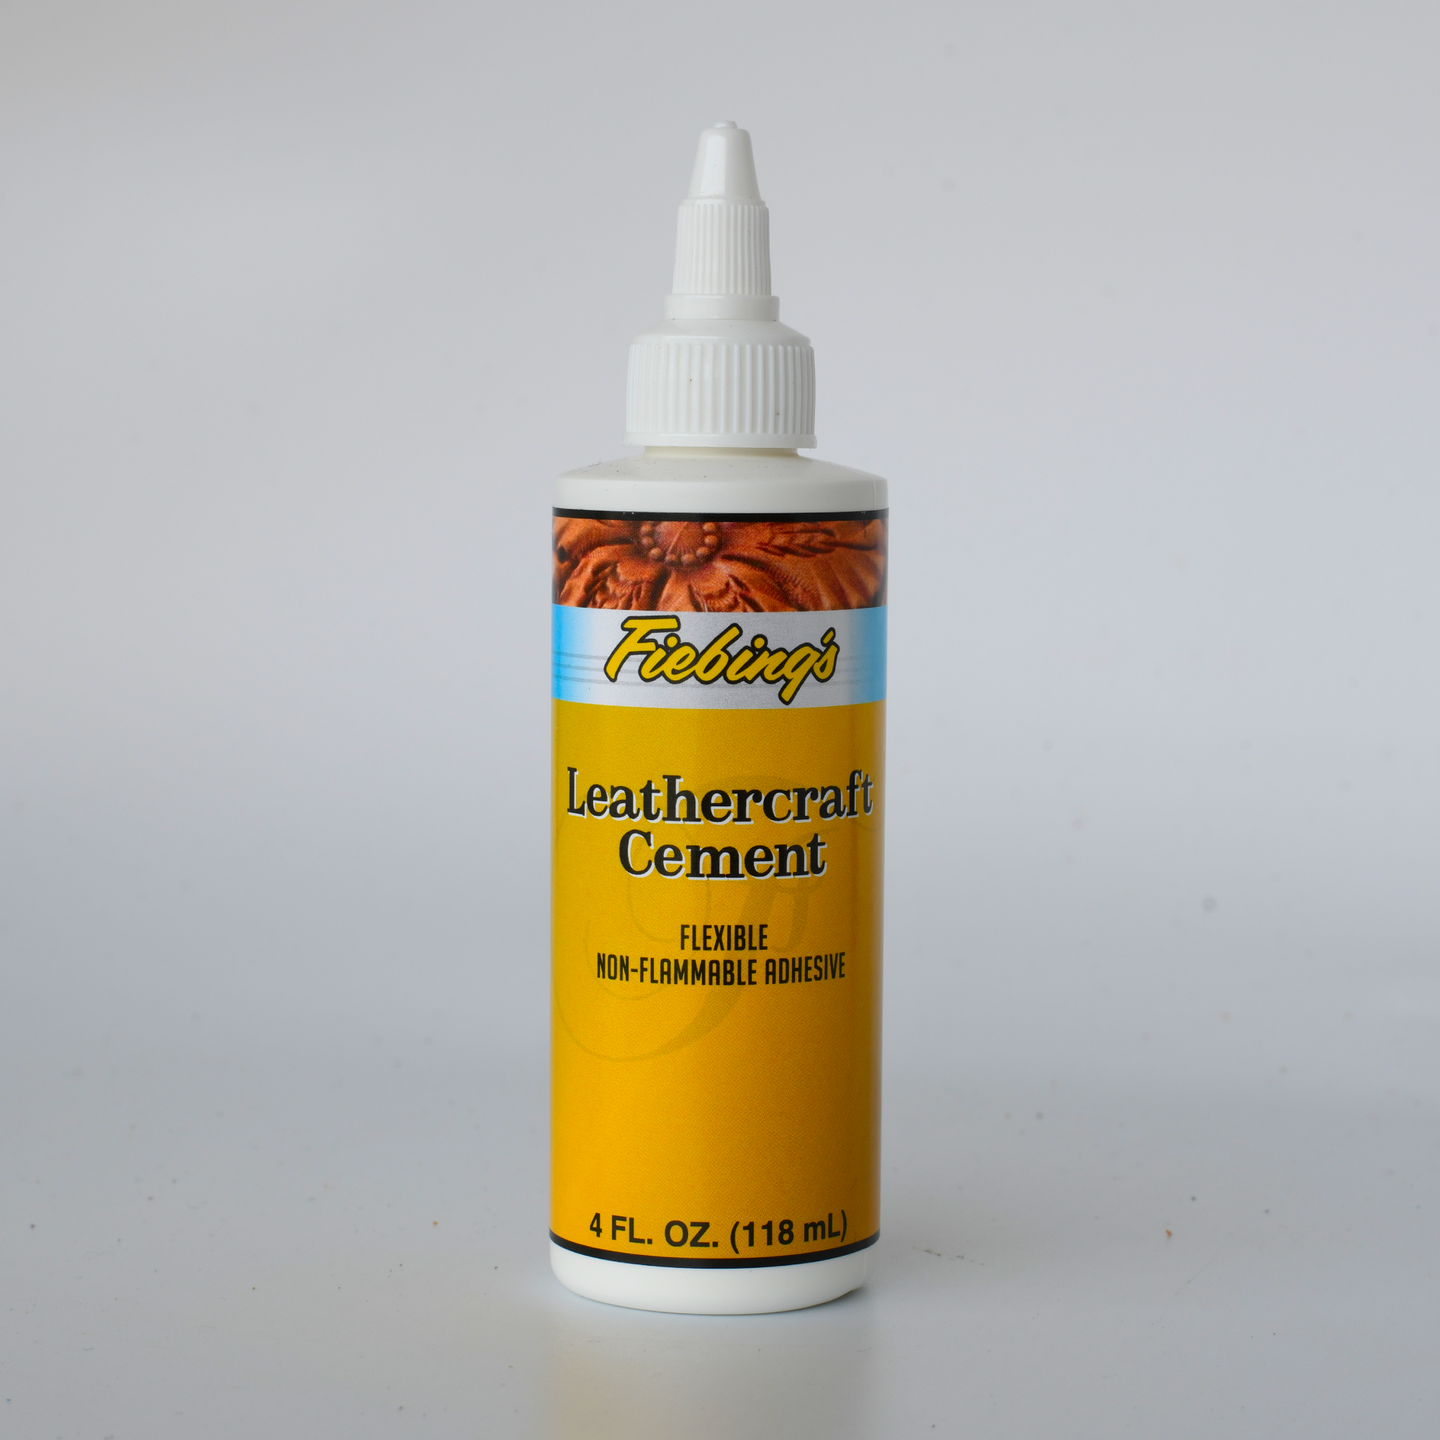 Leather Care Glues and Paints